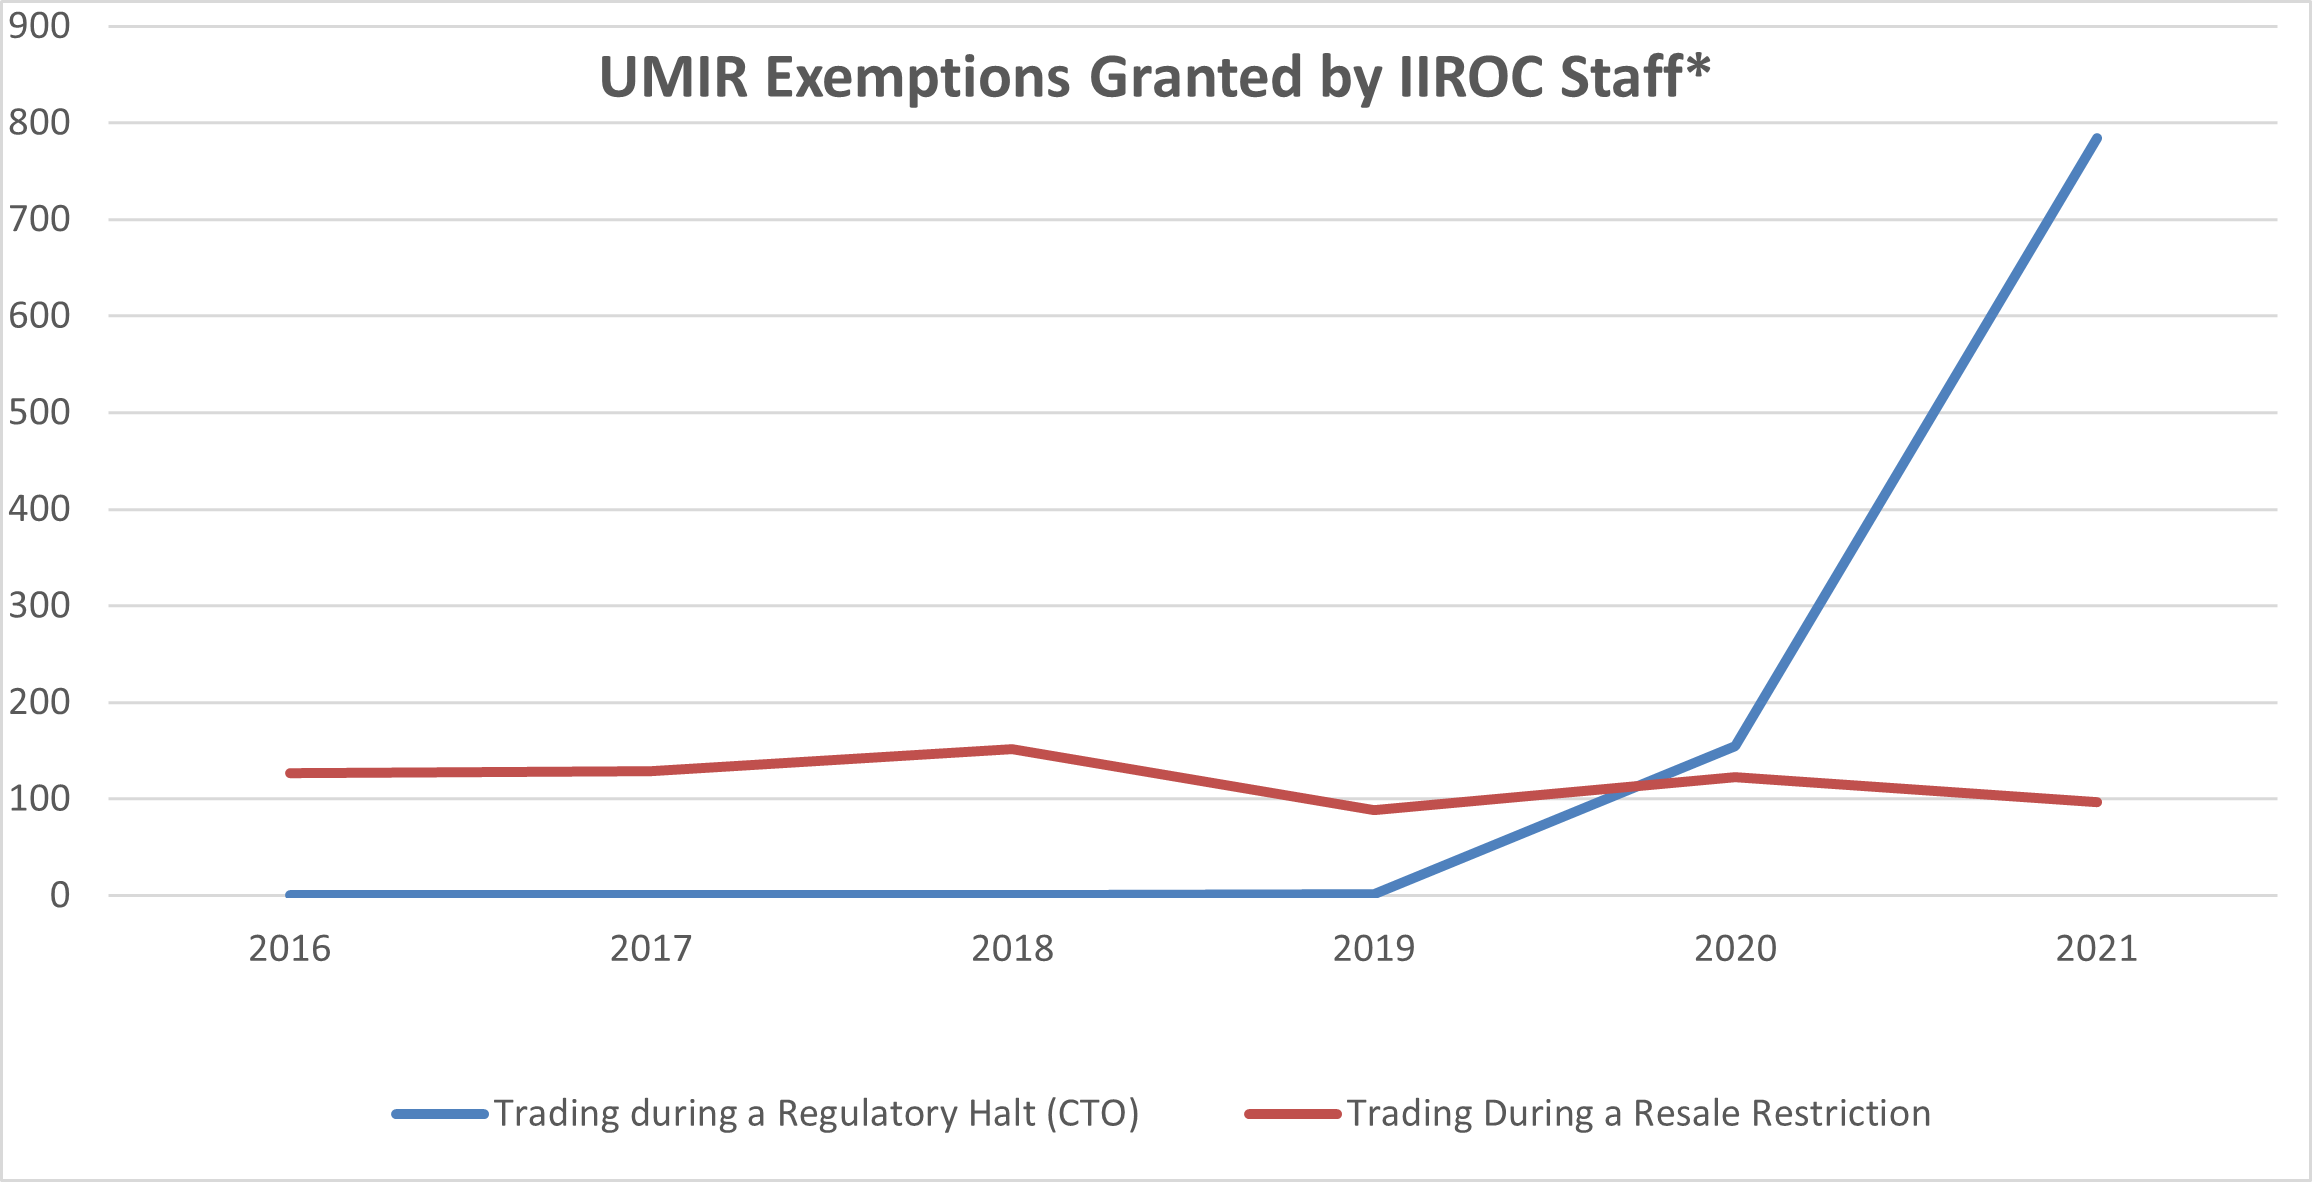 UMIR Exemptions Granted by IIROC Staff